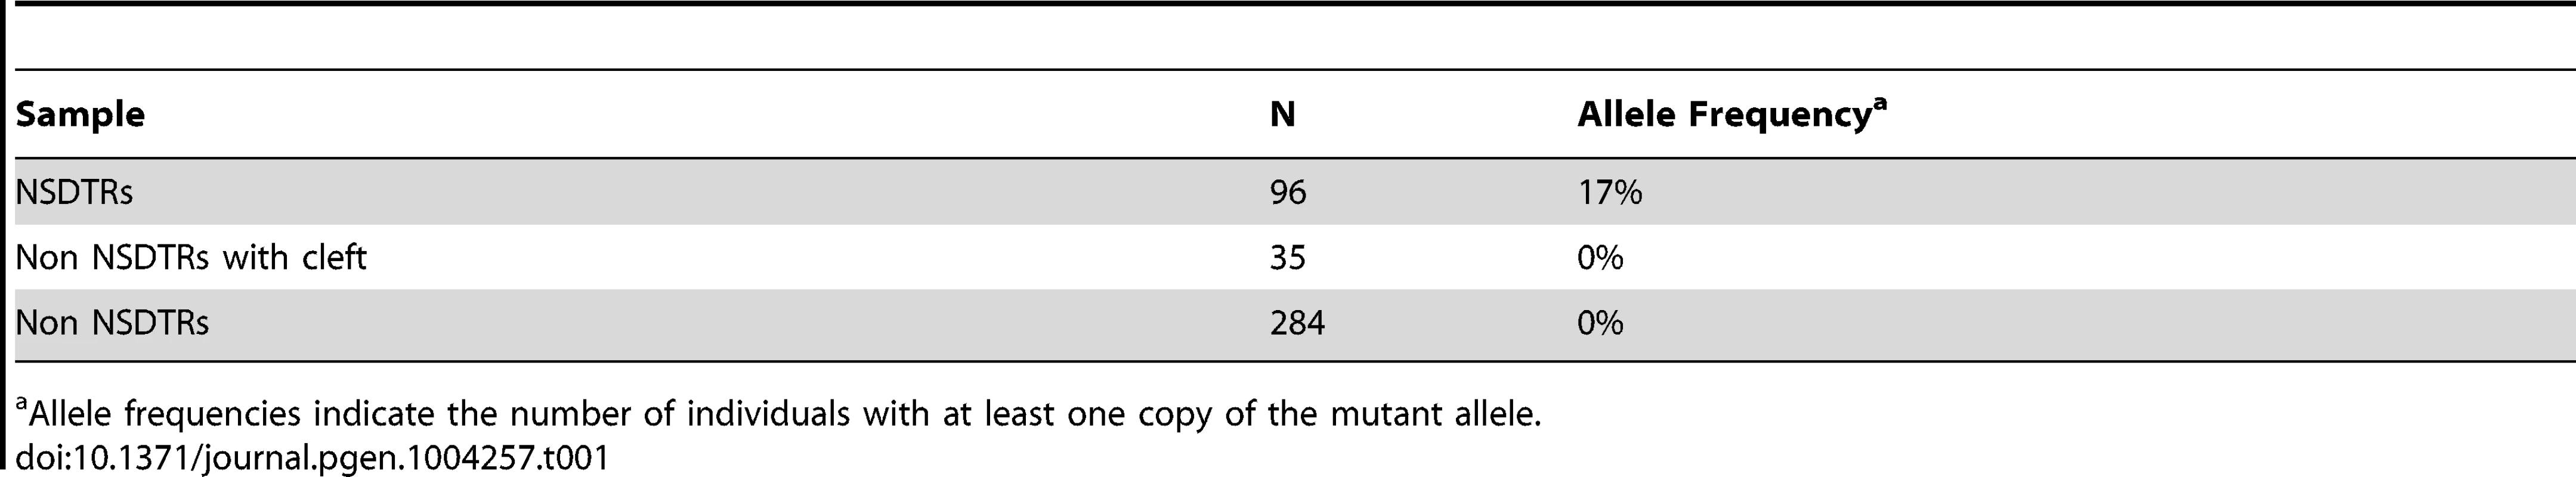 Summary of allele frequencies of genotyping results.